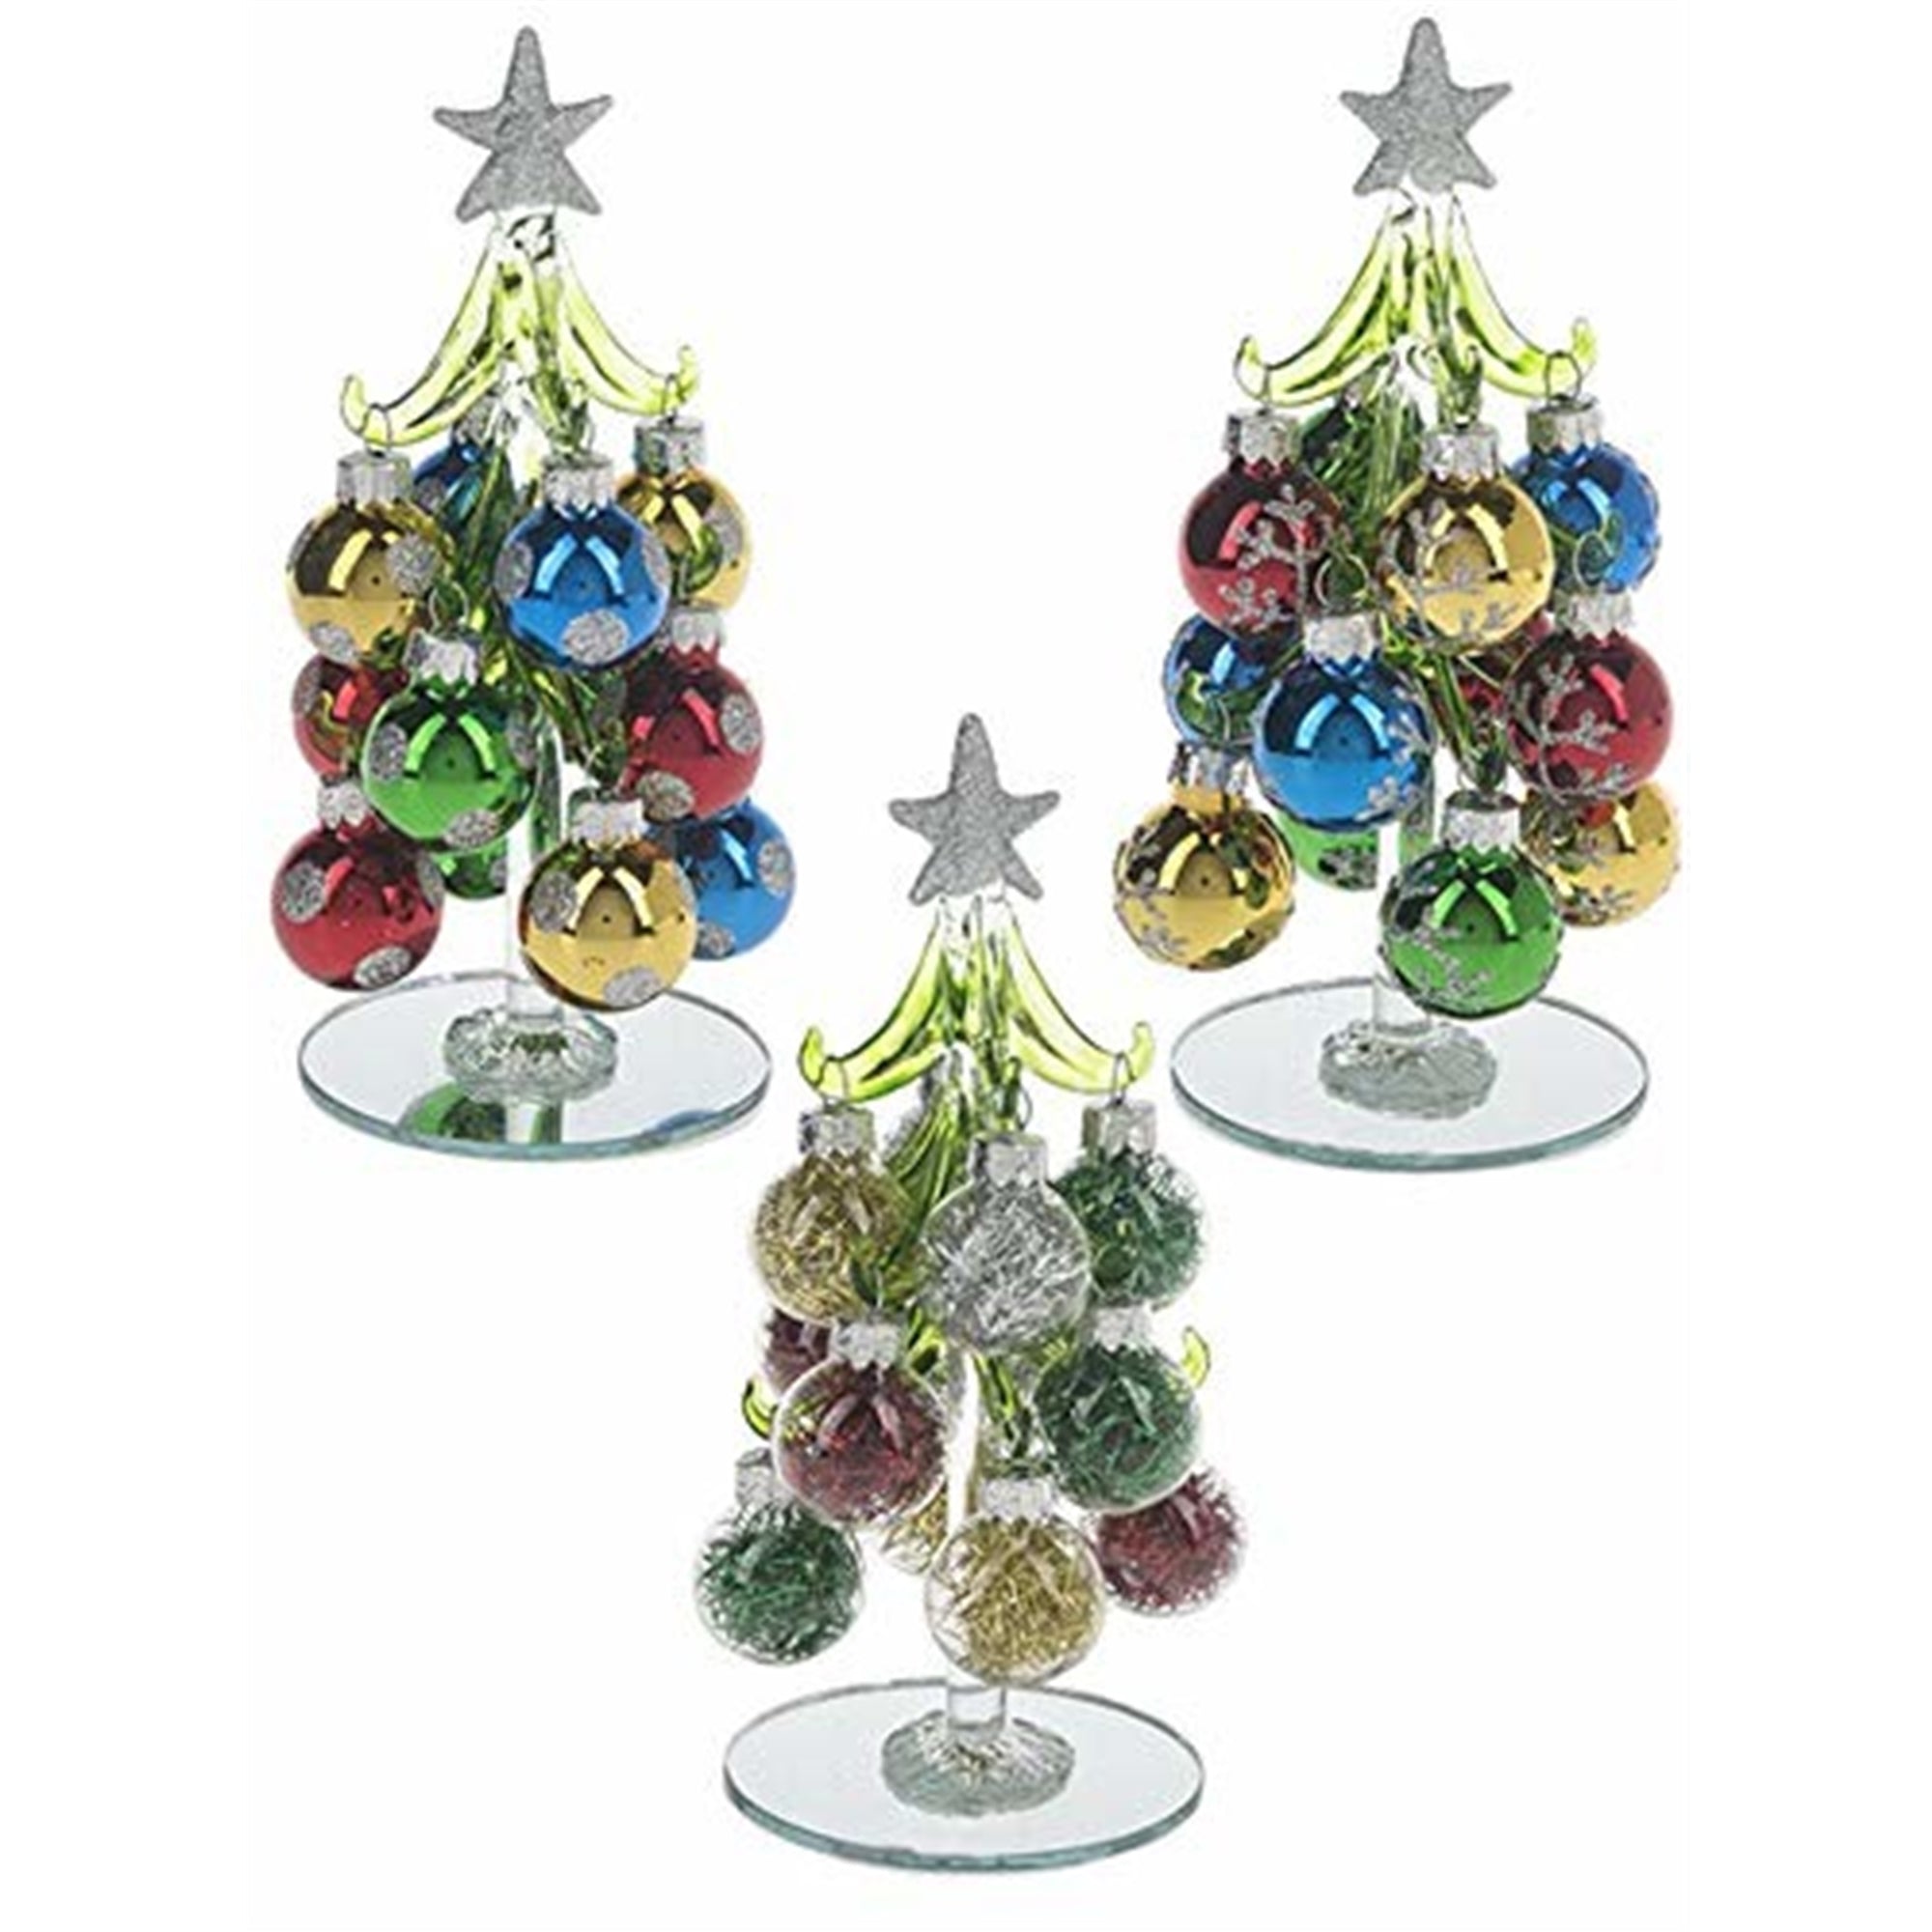 Ganz 6 Holiday Trees w/ Ball Ornaments, 3 Trees, 36 Ornaments